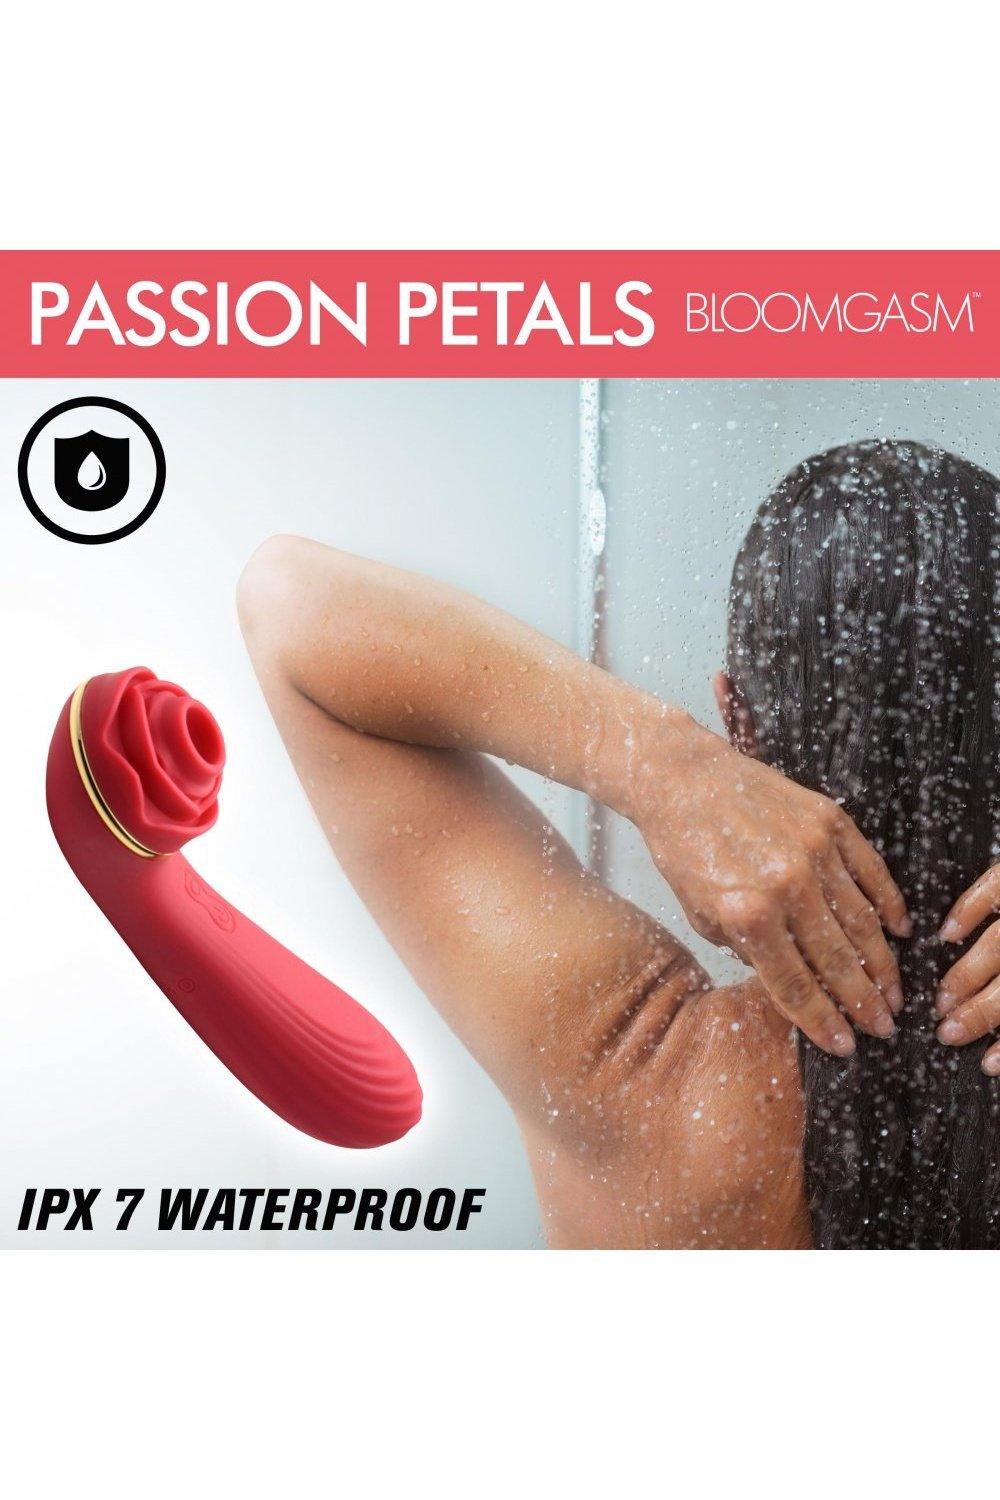 Passion Petals 10X Silicone Suction Rose Vibrator - Red - Sex On the Go